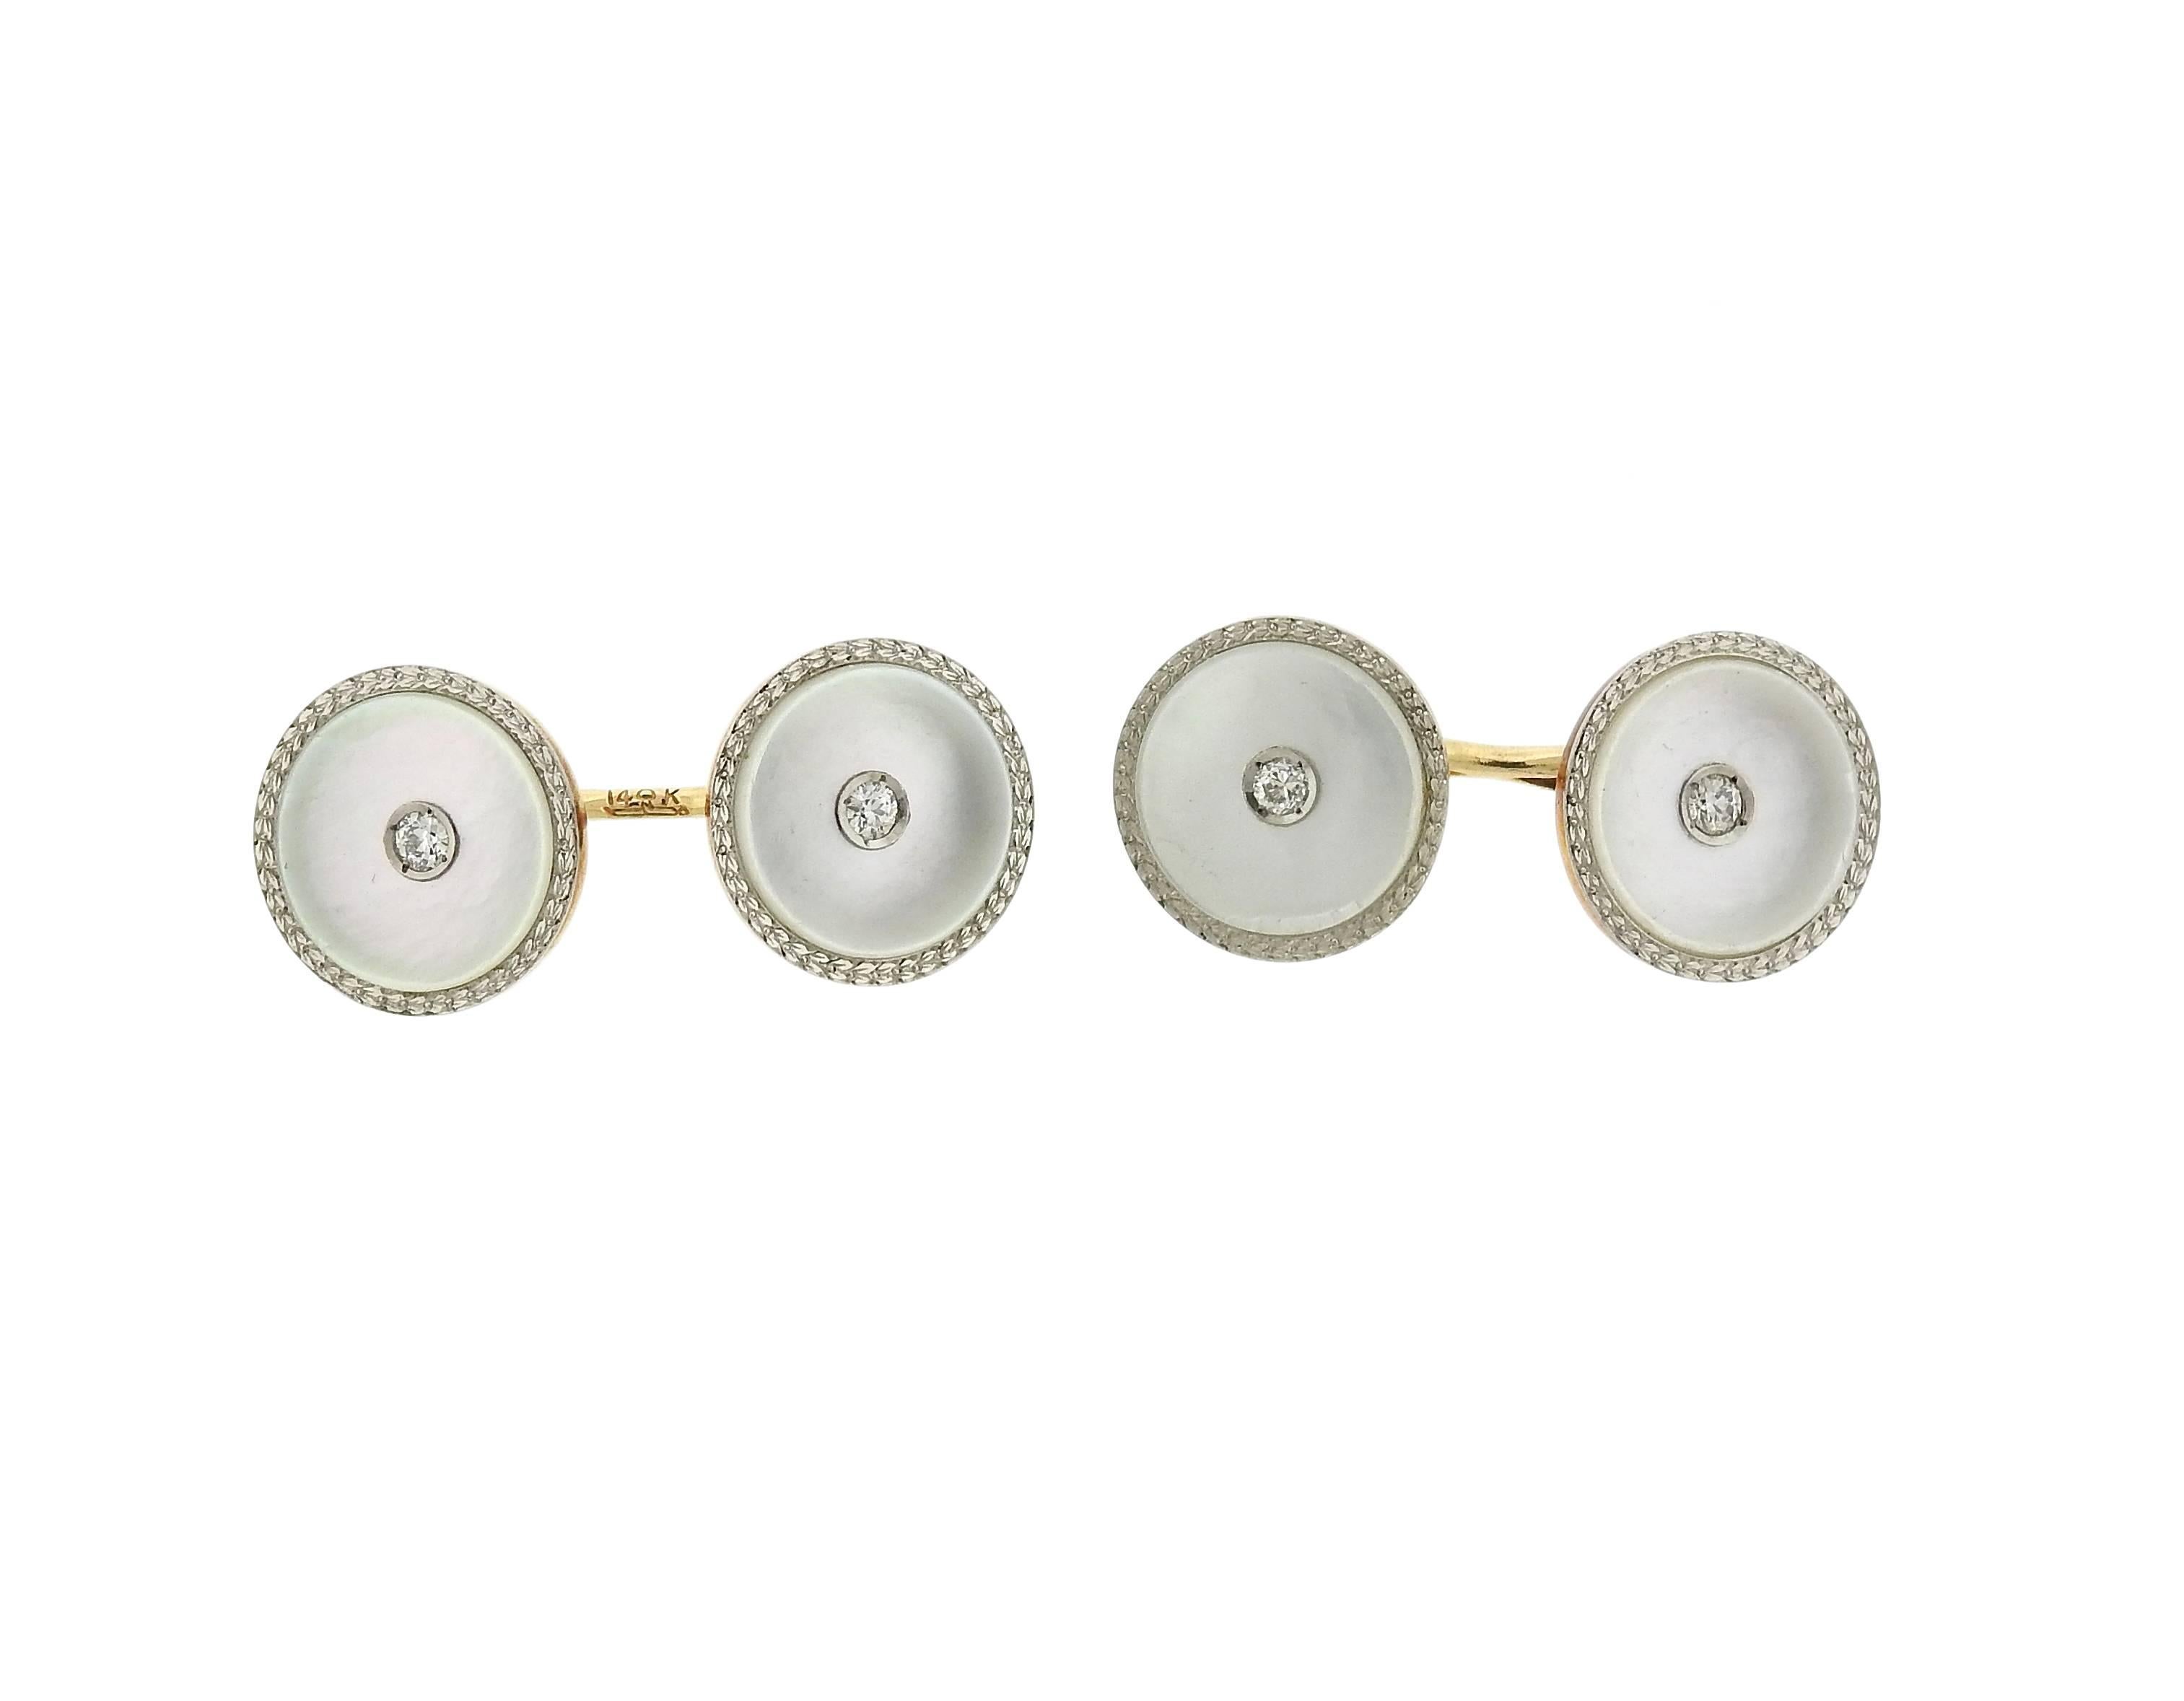 14k gold cufflinks and stud set, crafted by circa 1920s, decorated with mother of pearl tops and approx. 0.50ctw in diamonds. Cufflink top is 14mm in diameter, small stud top - 8mm in diameter. Marked: 14k. Weight - 18 grams 